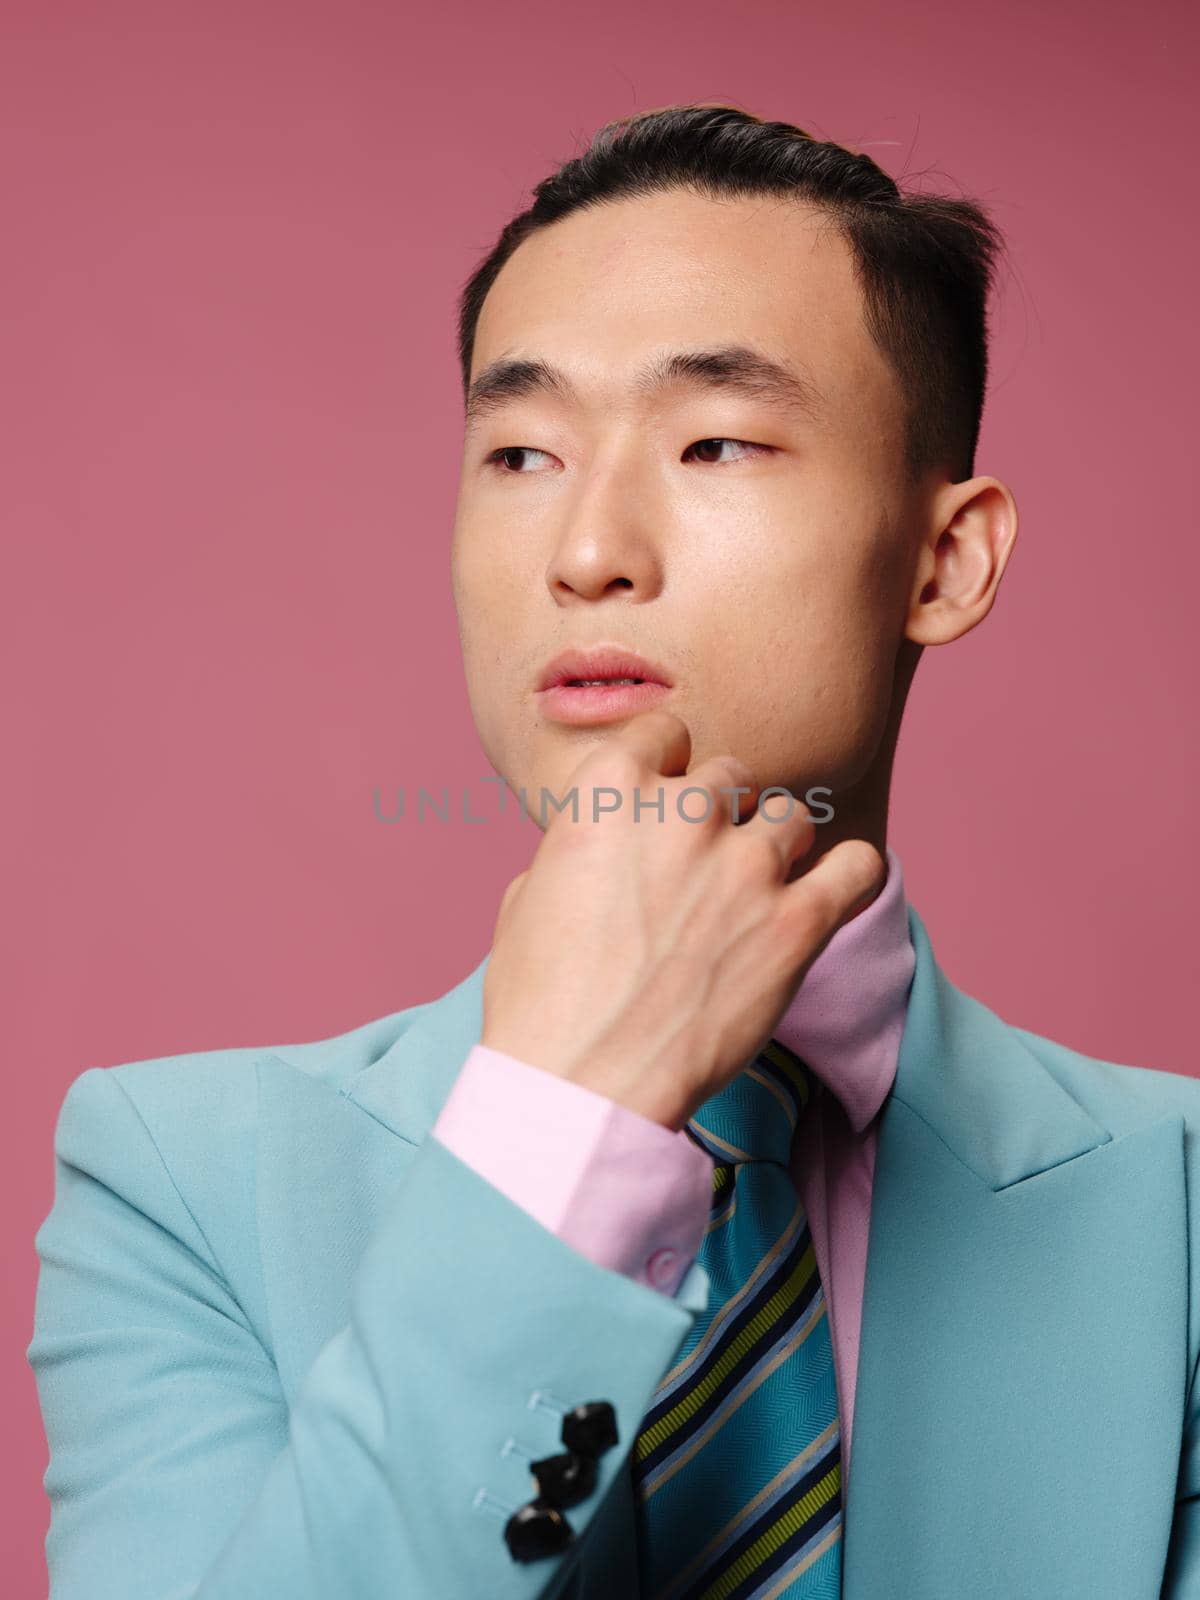 Man asian appearance close-up blue suit pink background emotions by SHOTPRIME